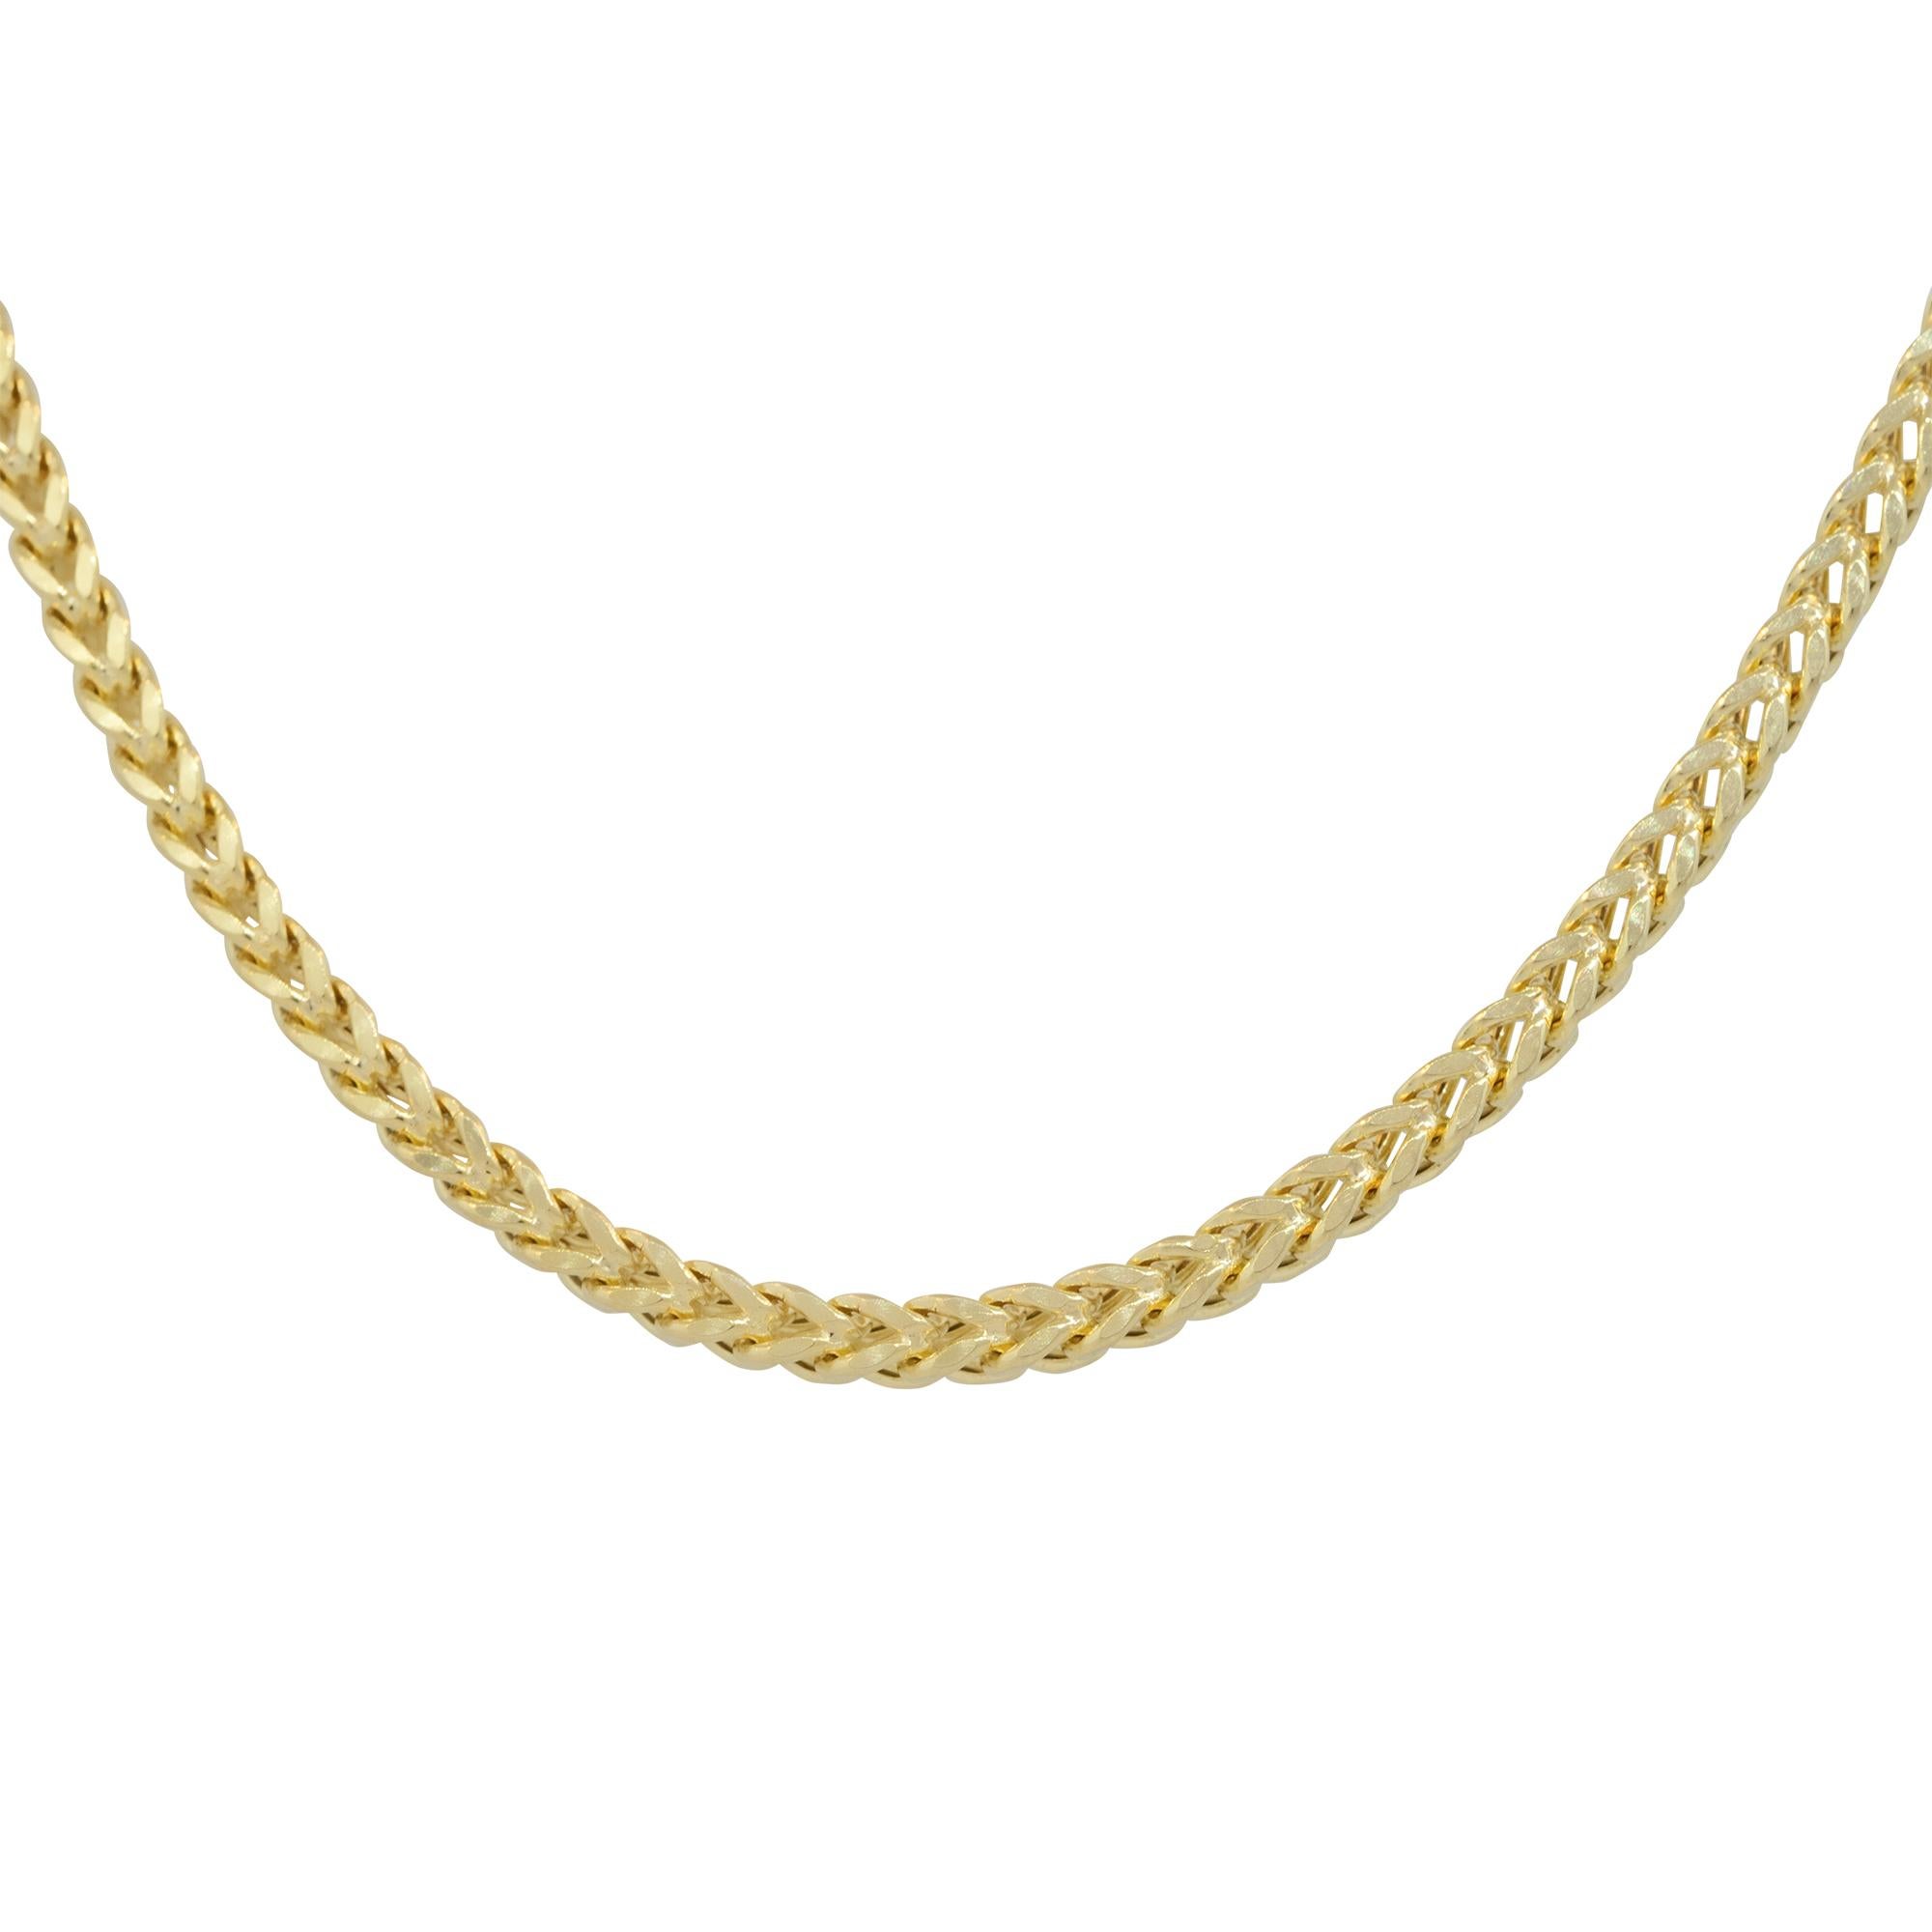 14k Yellow Gold 20″ Men's Franco Link Chain

Material: 14k Yellow Gold
Measurements: Necklace Measures 20″ in Length and 3.0mm in Thickness
Fastening: Spring Ring Clasp
Item Weight: 13.0g (8.4dwt)
Additional Details: This item comes with a